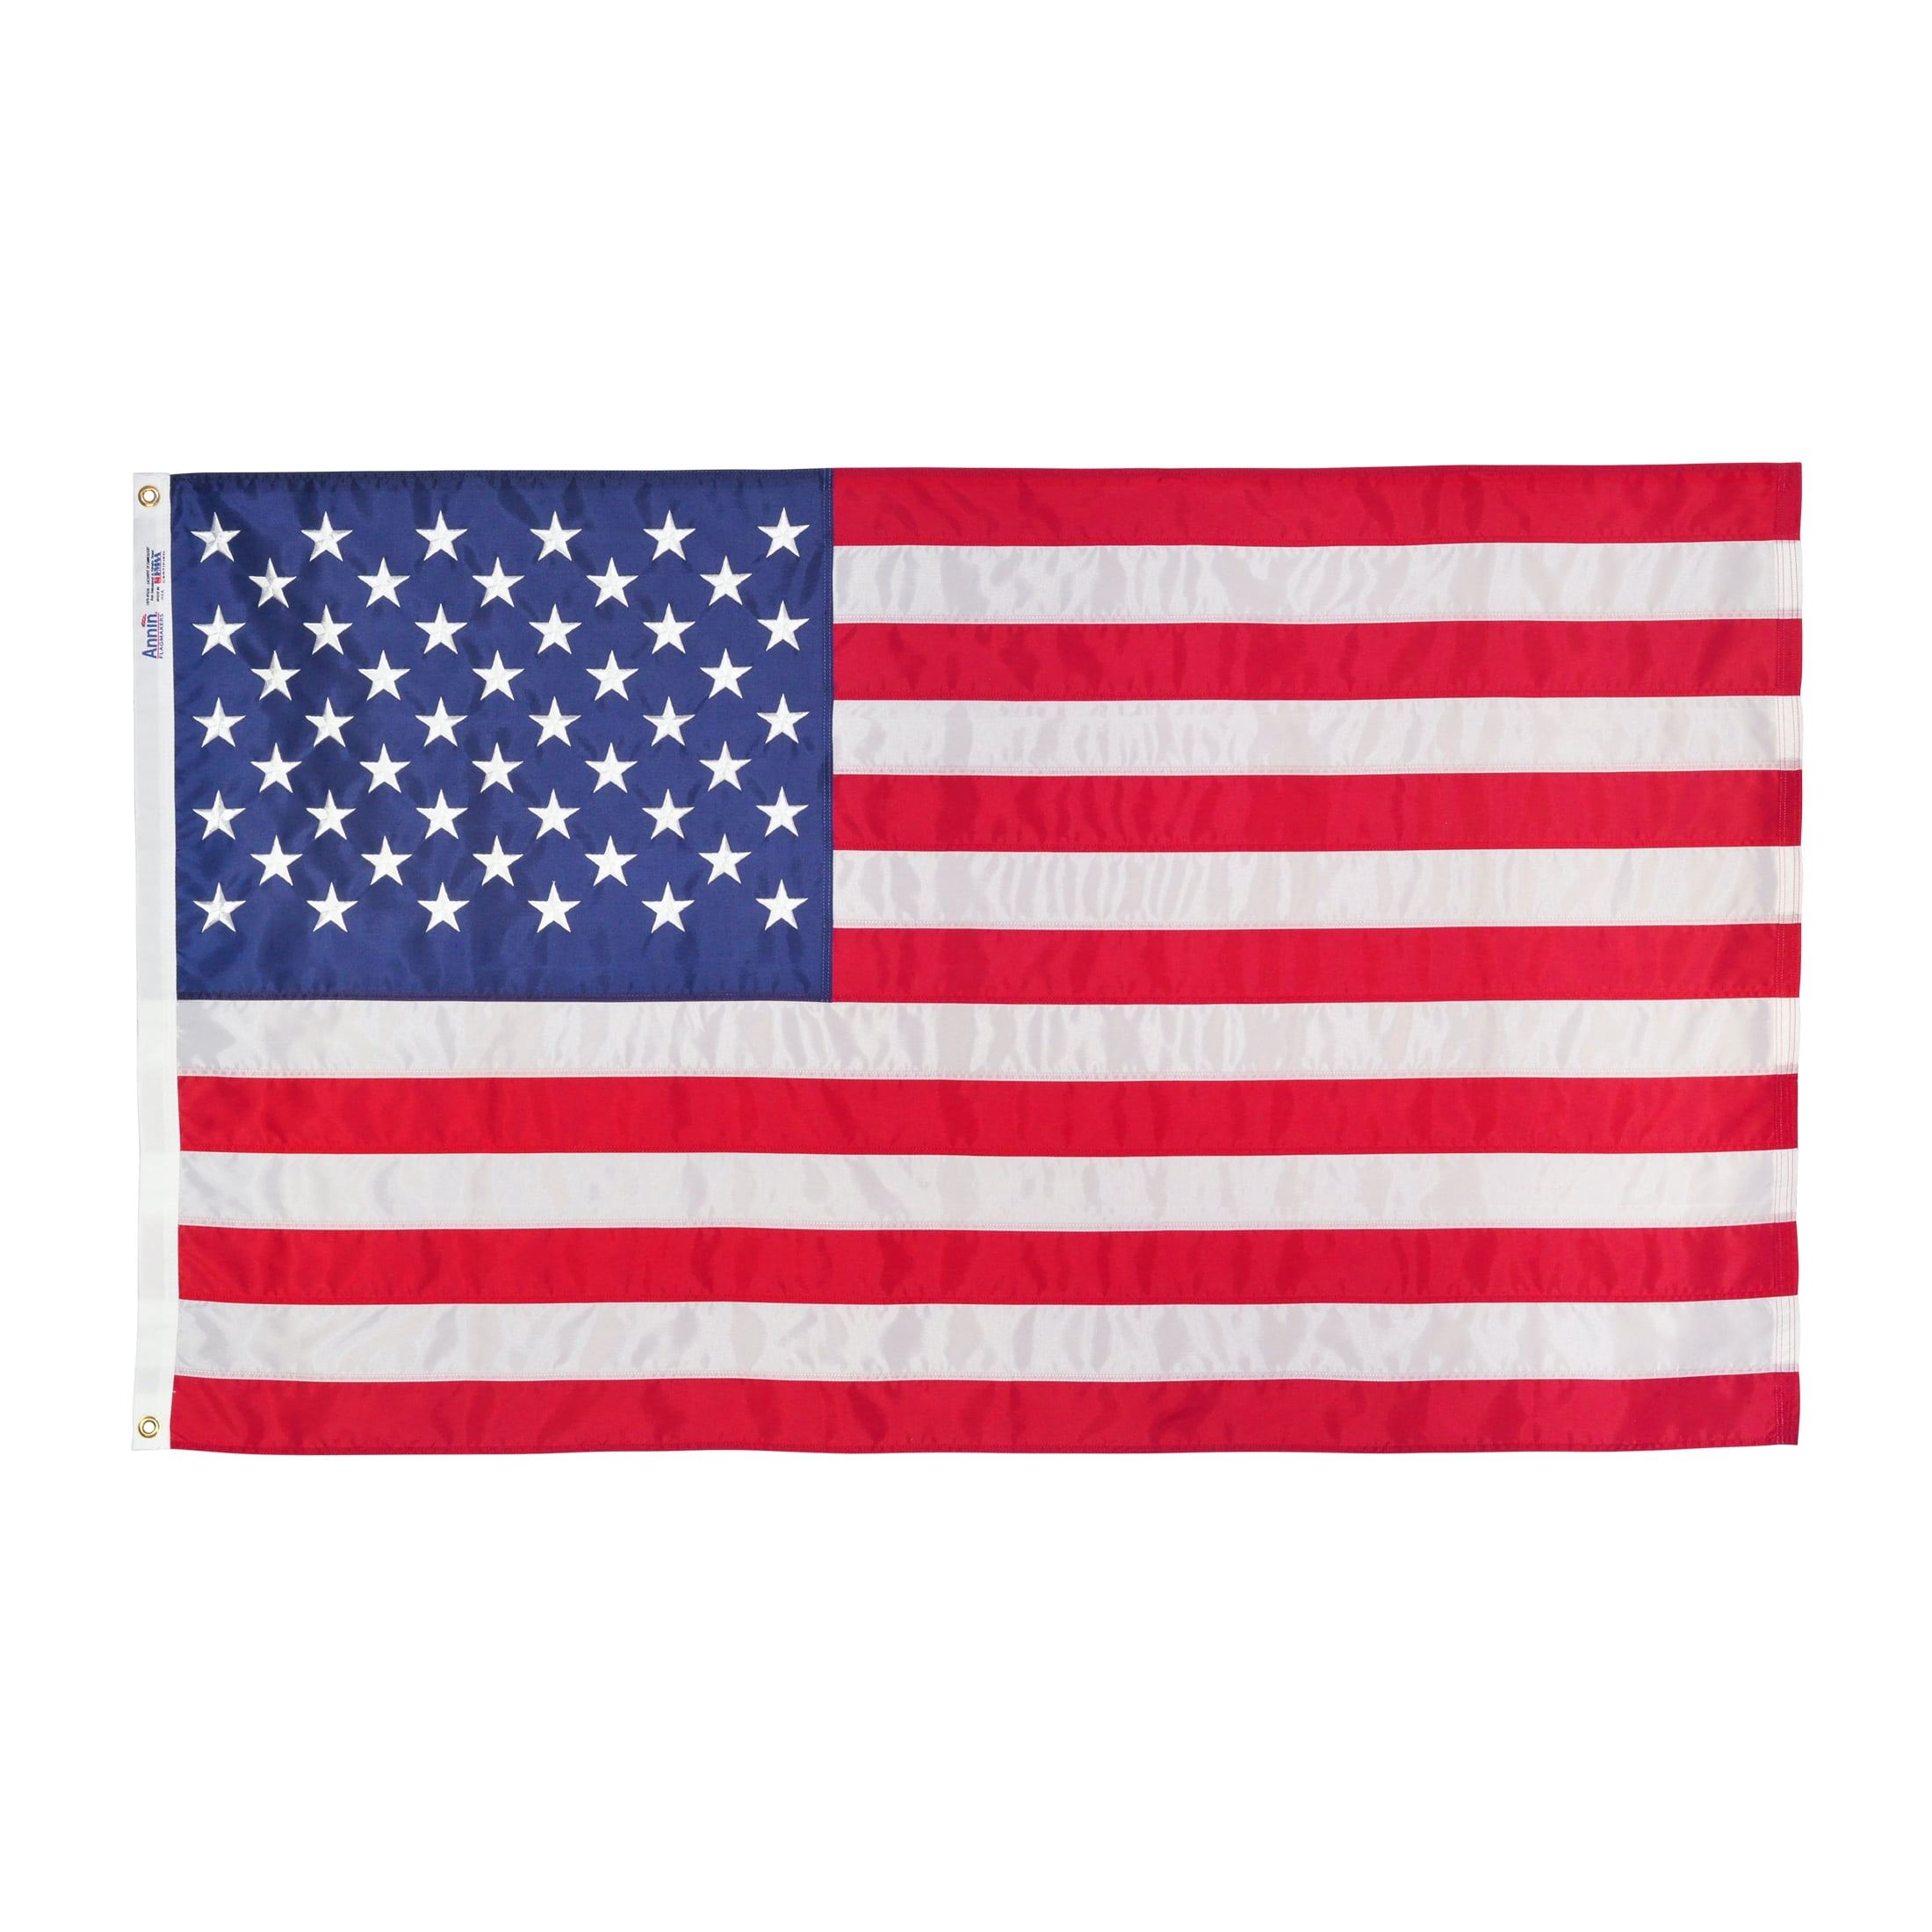 American Nylon Flag with Sewn Stripes and Embroidered Stars by Annin, 3 x 5